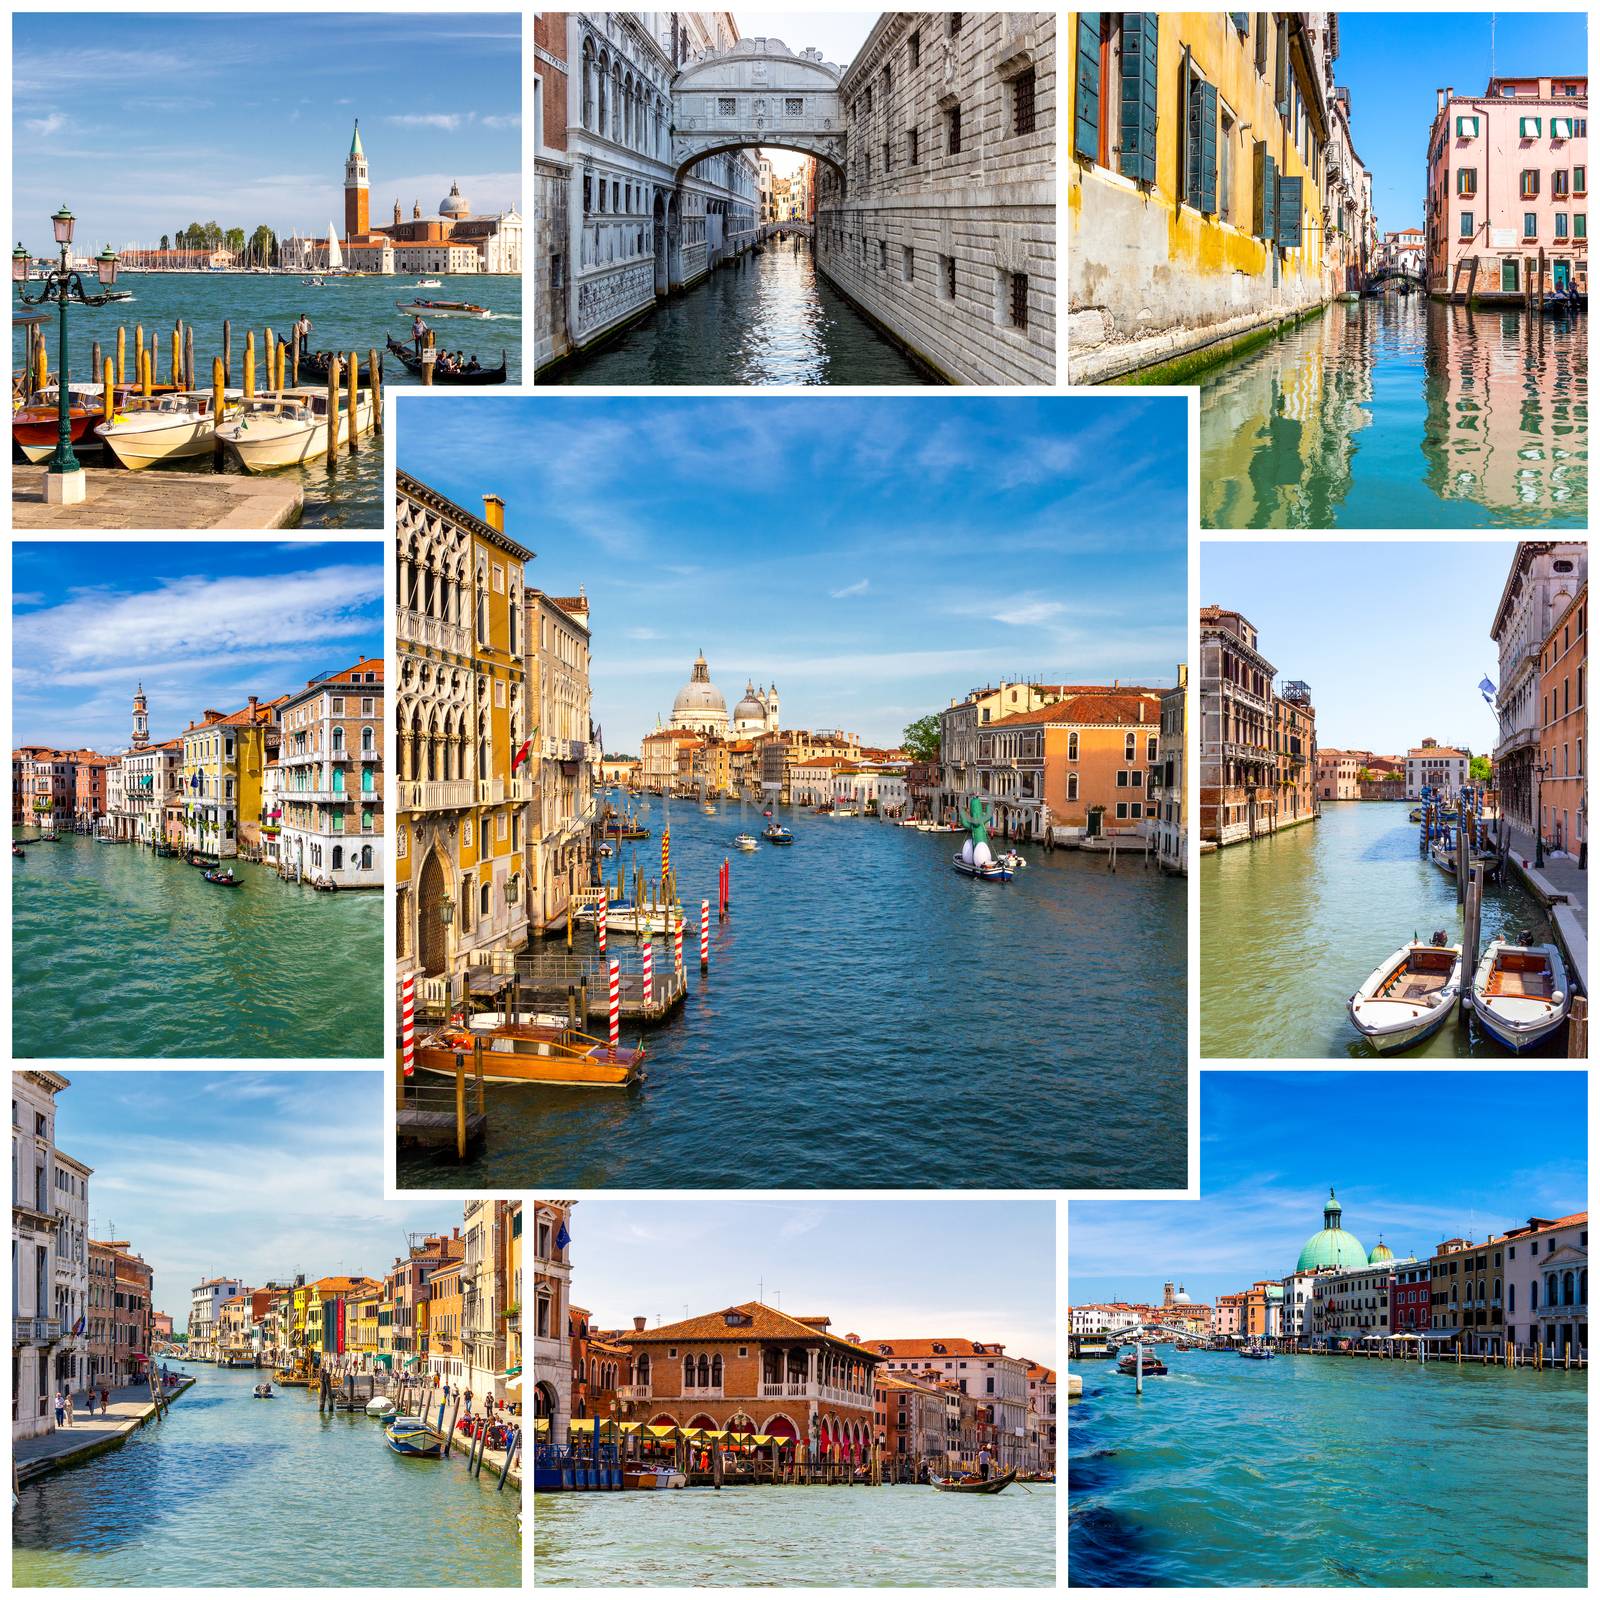 Collage of Venice photos in Italy by DaLiu